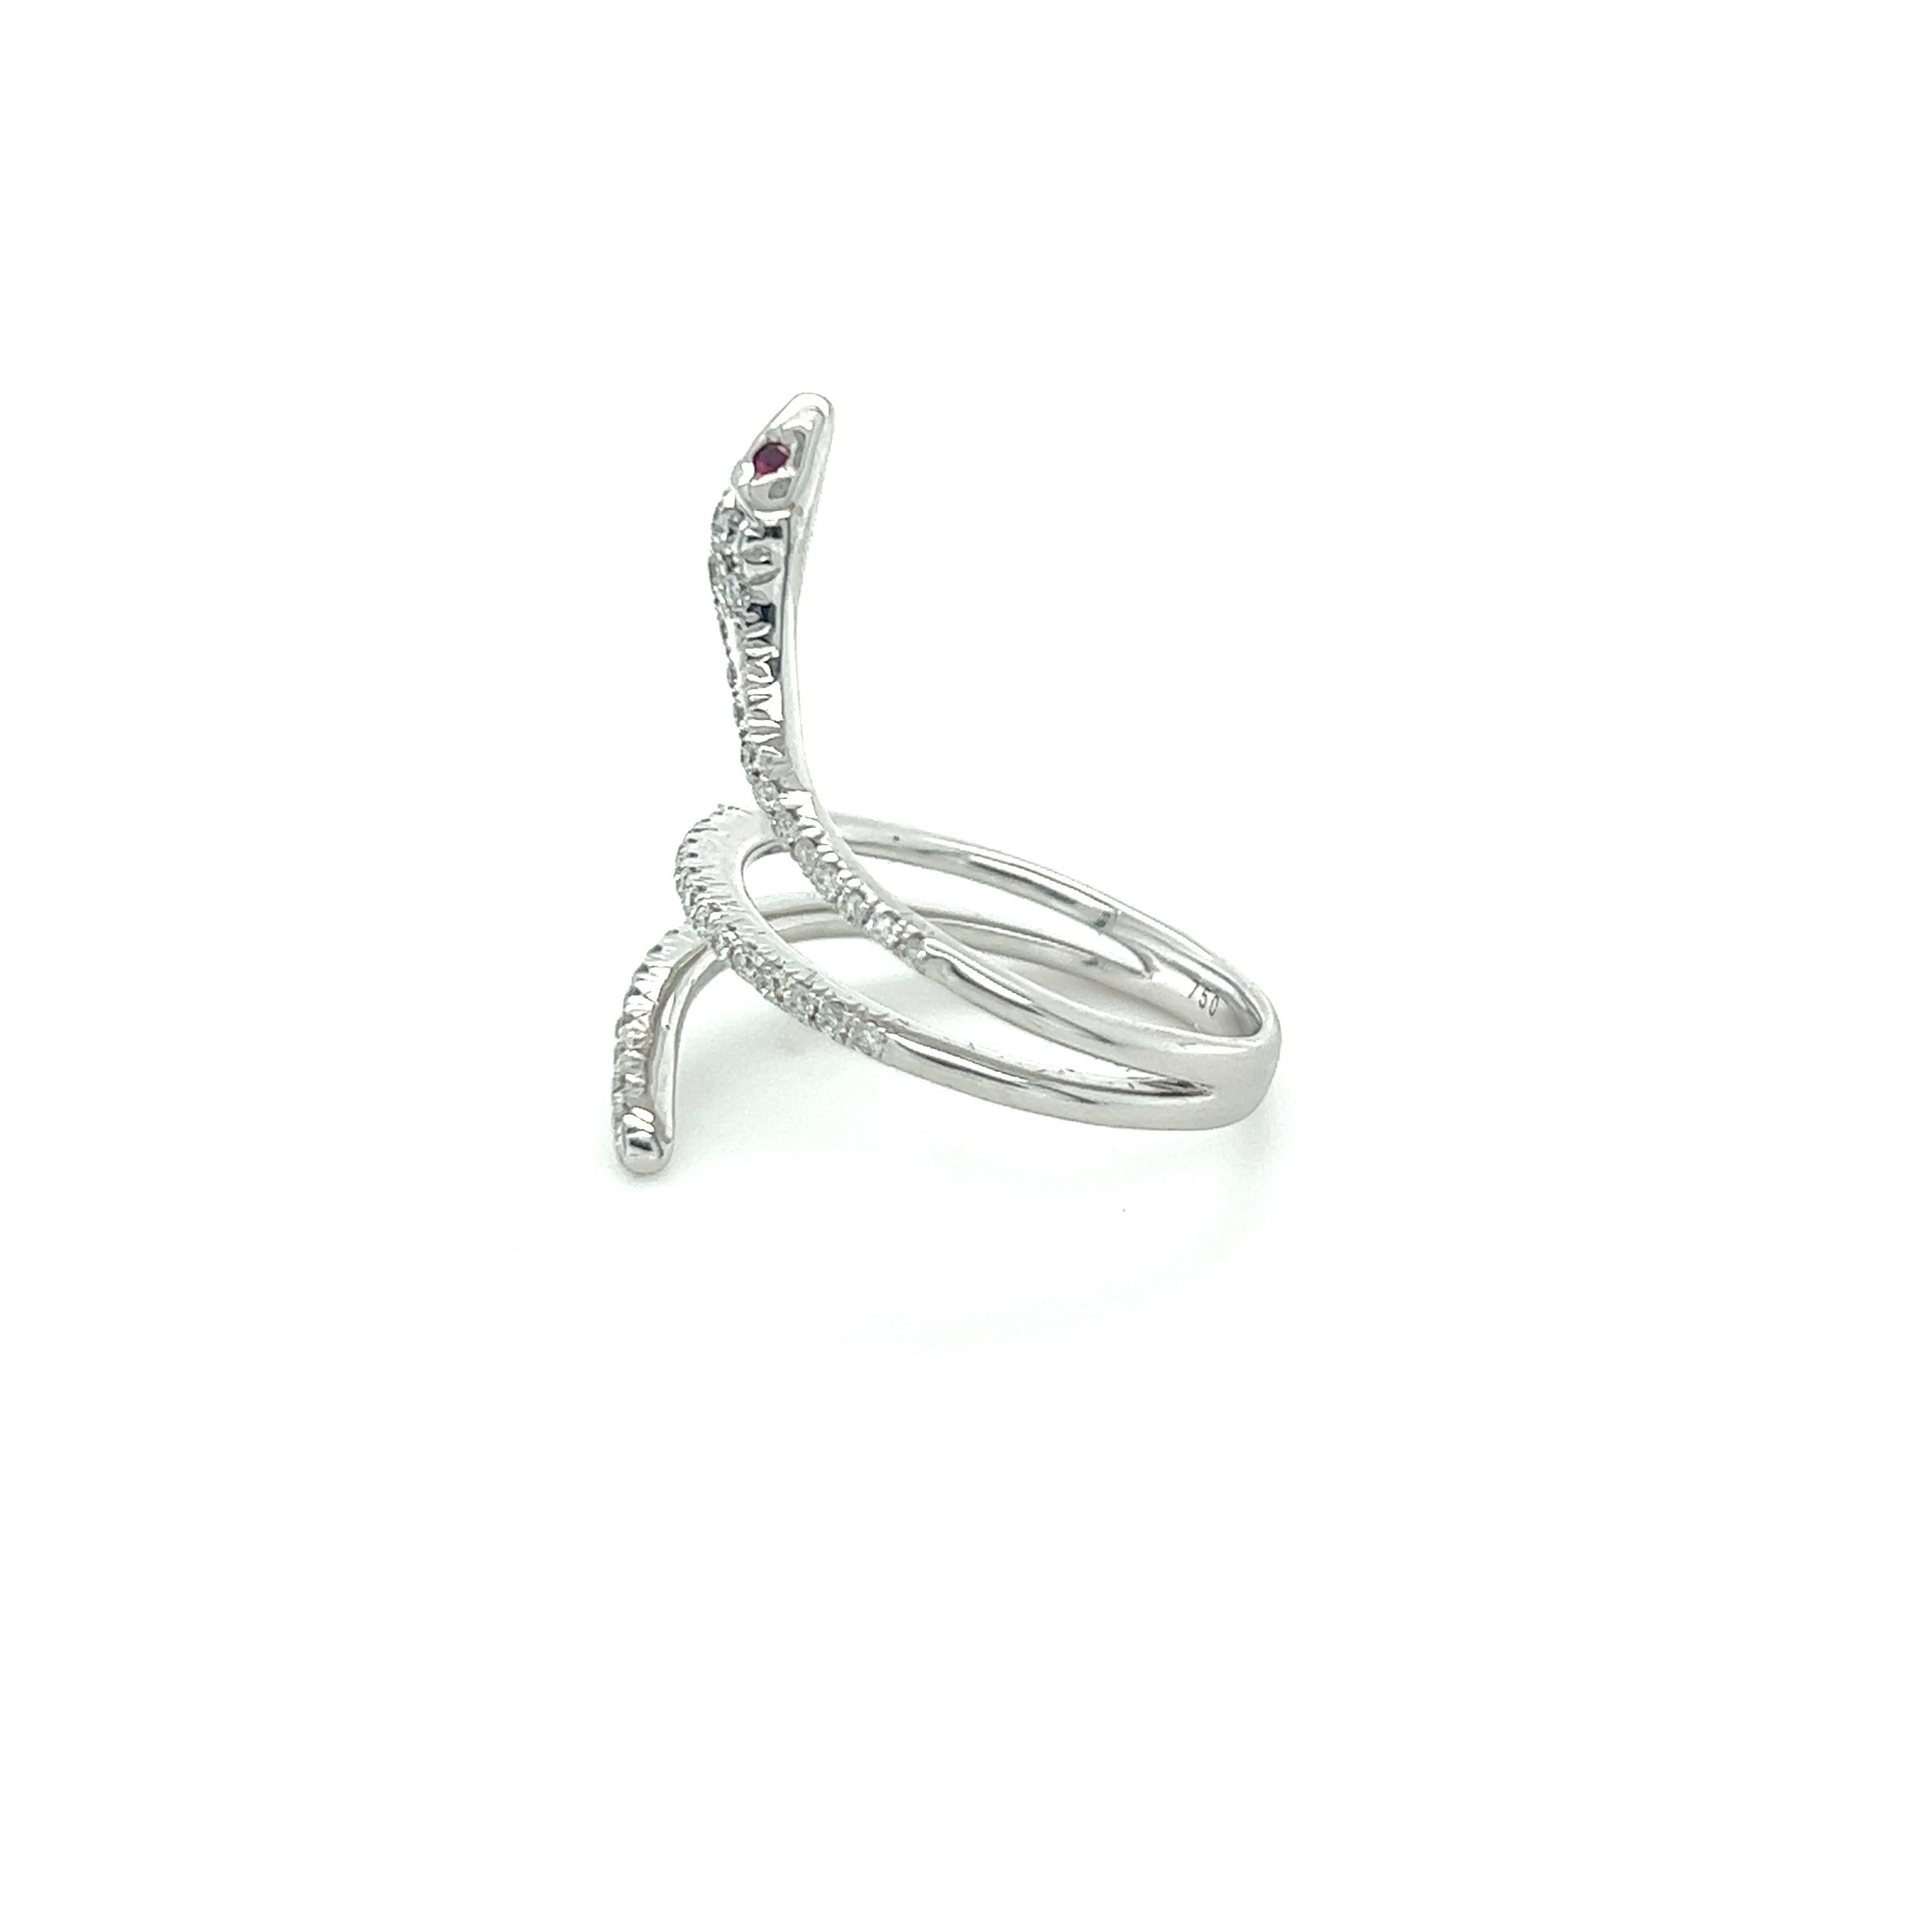 18K White Gold Diamond Snake Ring

44 Diamonds 0.34CT
2 Rubies  0.03CT
18K White Gold 4.13GM

The diamond means clarity, truth, and vision. Handicrafters made this noble and shining snake out of precious diamonds. It seems to remind you of those